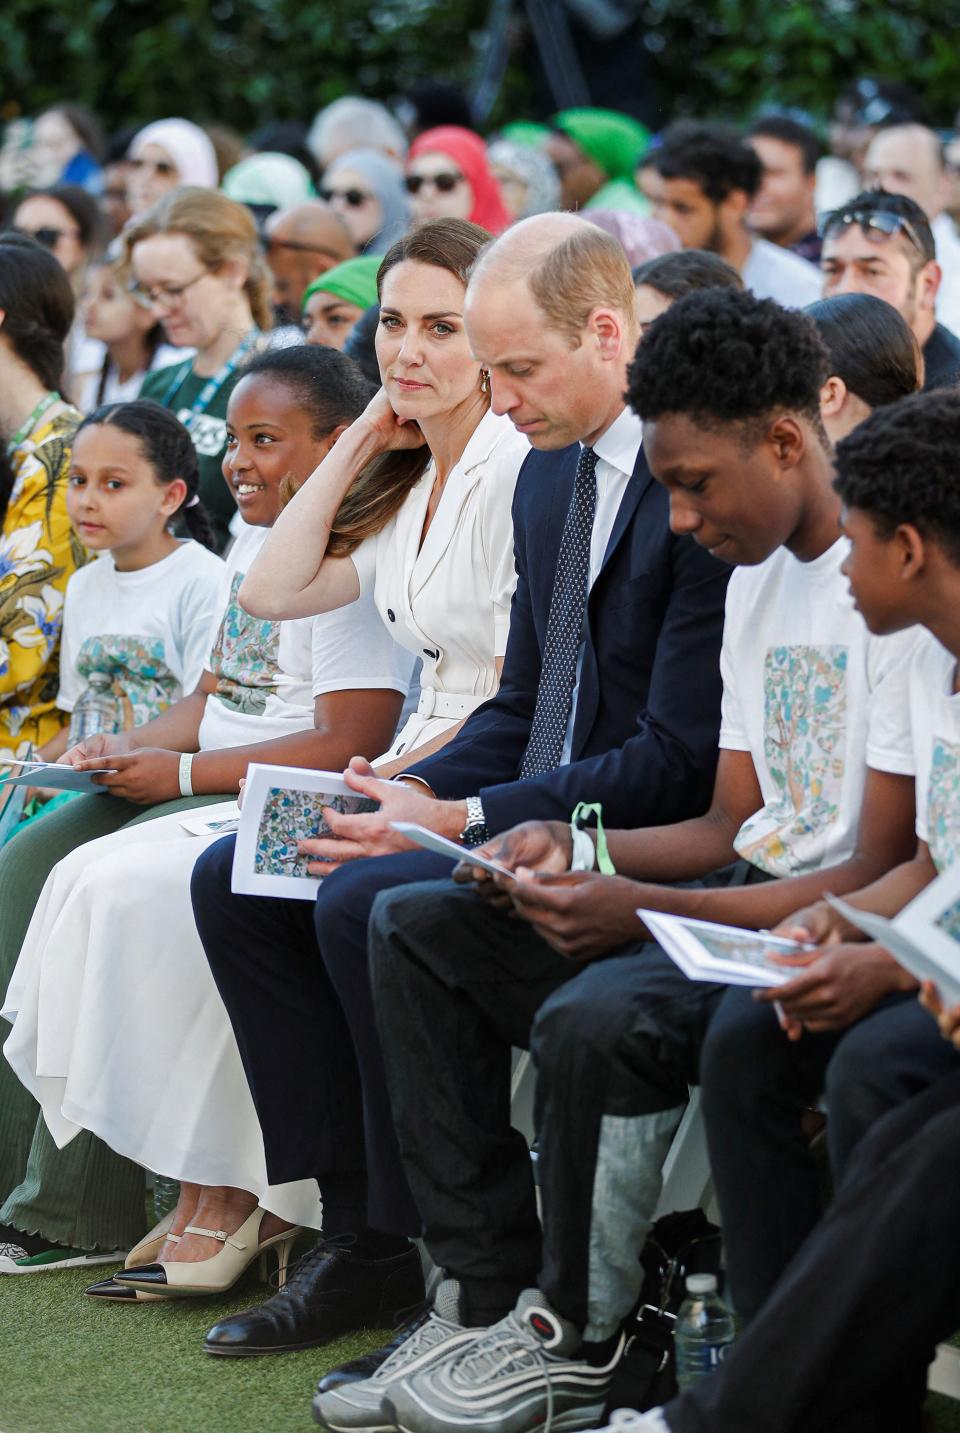 Britain's Catherine, Duchess of Cambridge and Britain's Prince William, Duke of Cambridge (C) attend a memorial service at the foot of Grenfell Tower in London, on June 14, 2022, the fifth anniversary of the Grenfell Tower fire where 72 people lost their lives. - The names of the 72 people who perished in Britain's worst residential fire since World War II were read out on June 14, 2022 at a church service marking the fifth anniversary of the blaze. Survivors and families of the victims of the Grenfell Tower fire gathered at Westminster Abbey for the first of a day of events to remember the tragedy. (Photo by PETER NICHOLLS / POOL / AFP) (Photo by PETER NICHOLLS/POOL/AFP via Getty Images)